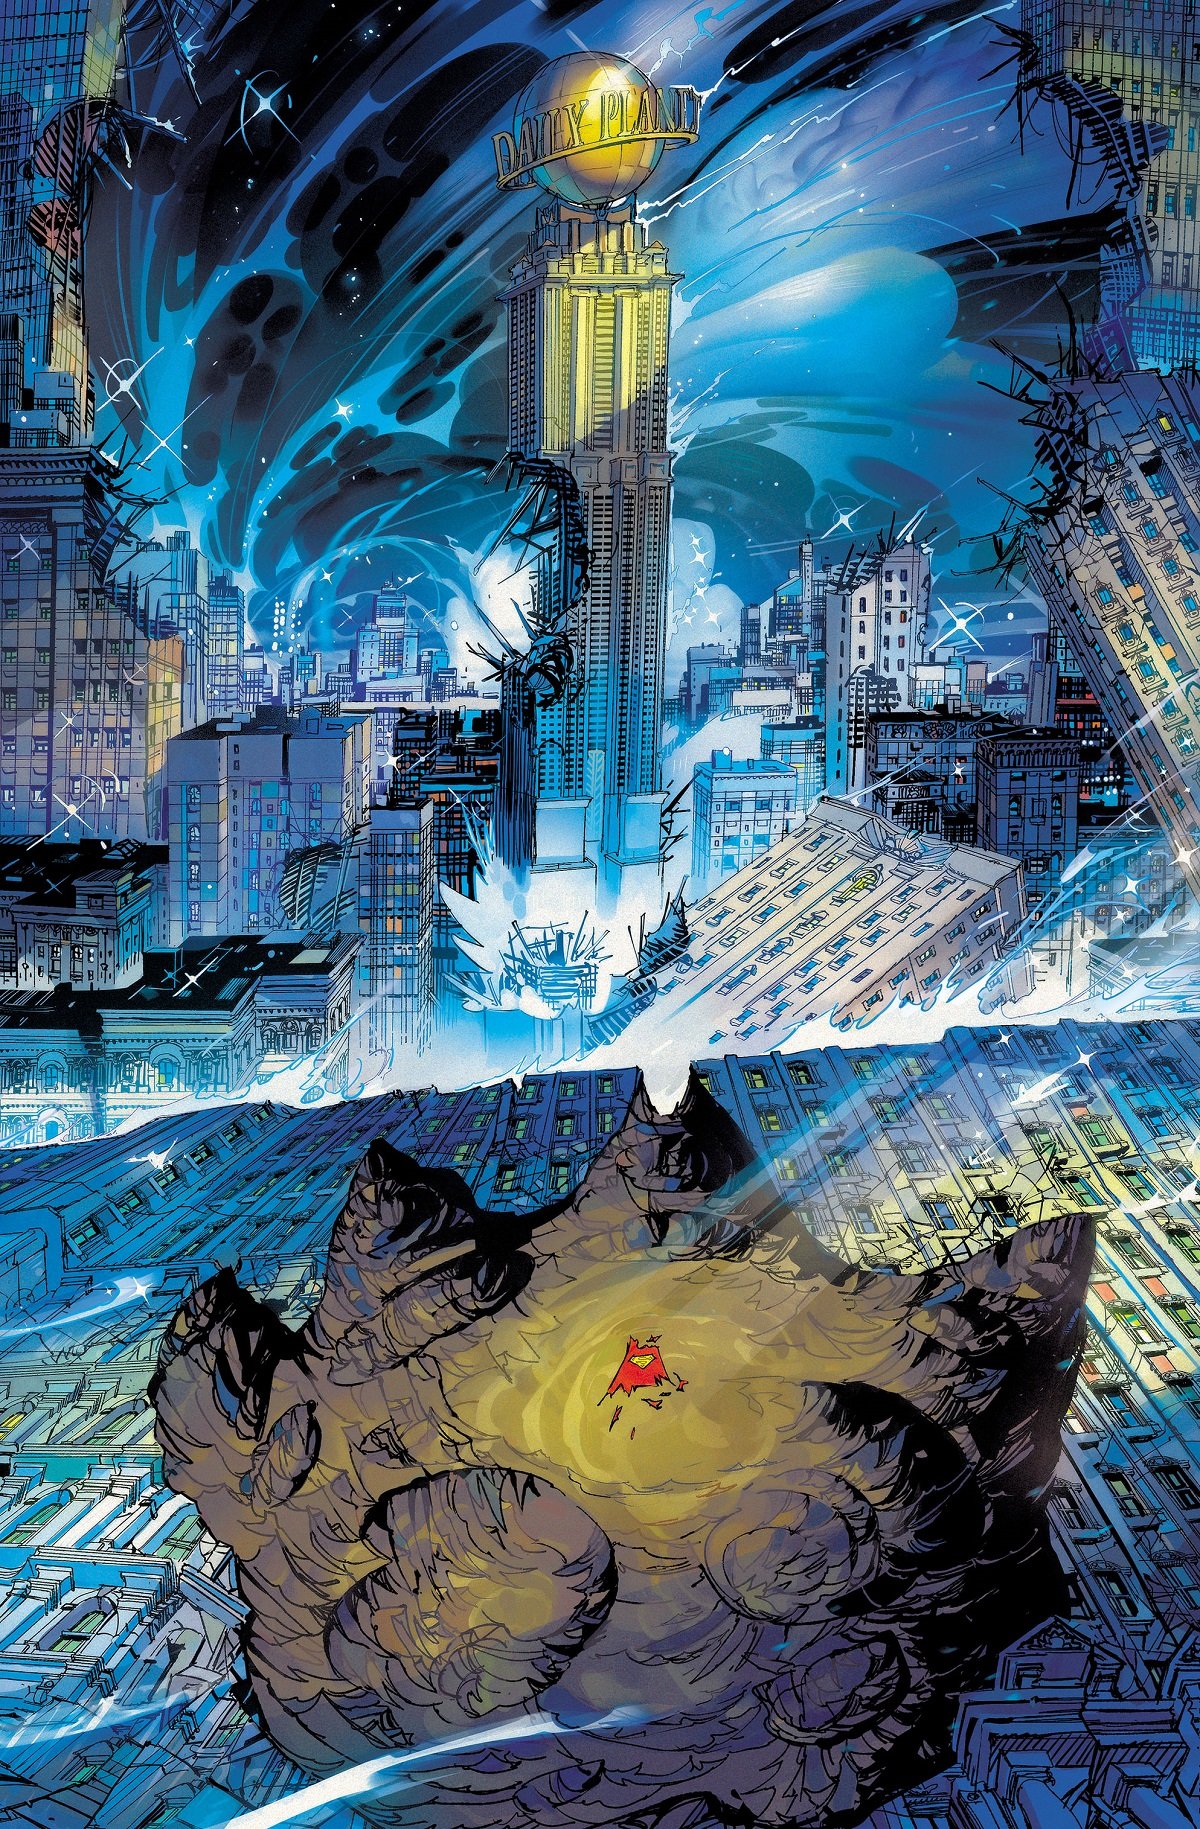 Metropolis is wrecked in the 1:50 variant cover for issue #3 of Justice League vs. Godzilla vs. Kong, by artist Arist Deyn.